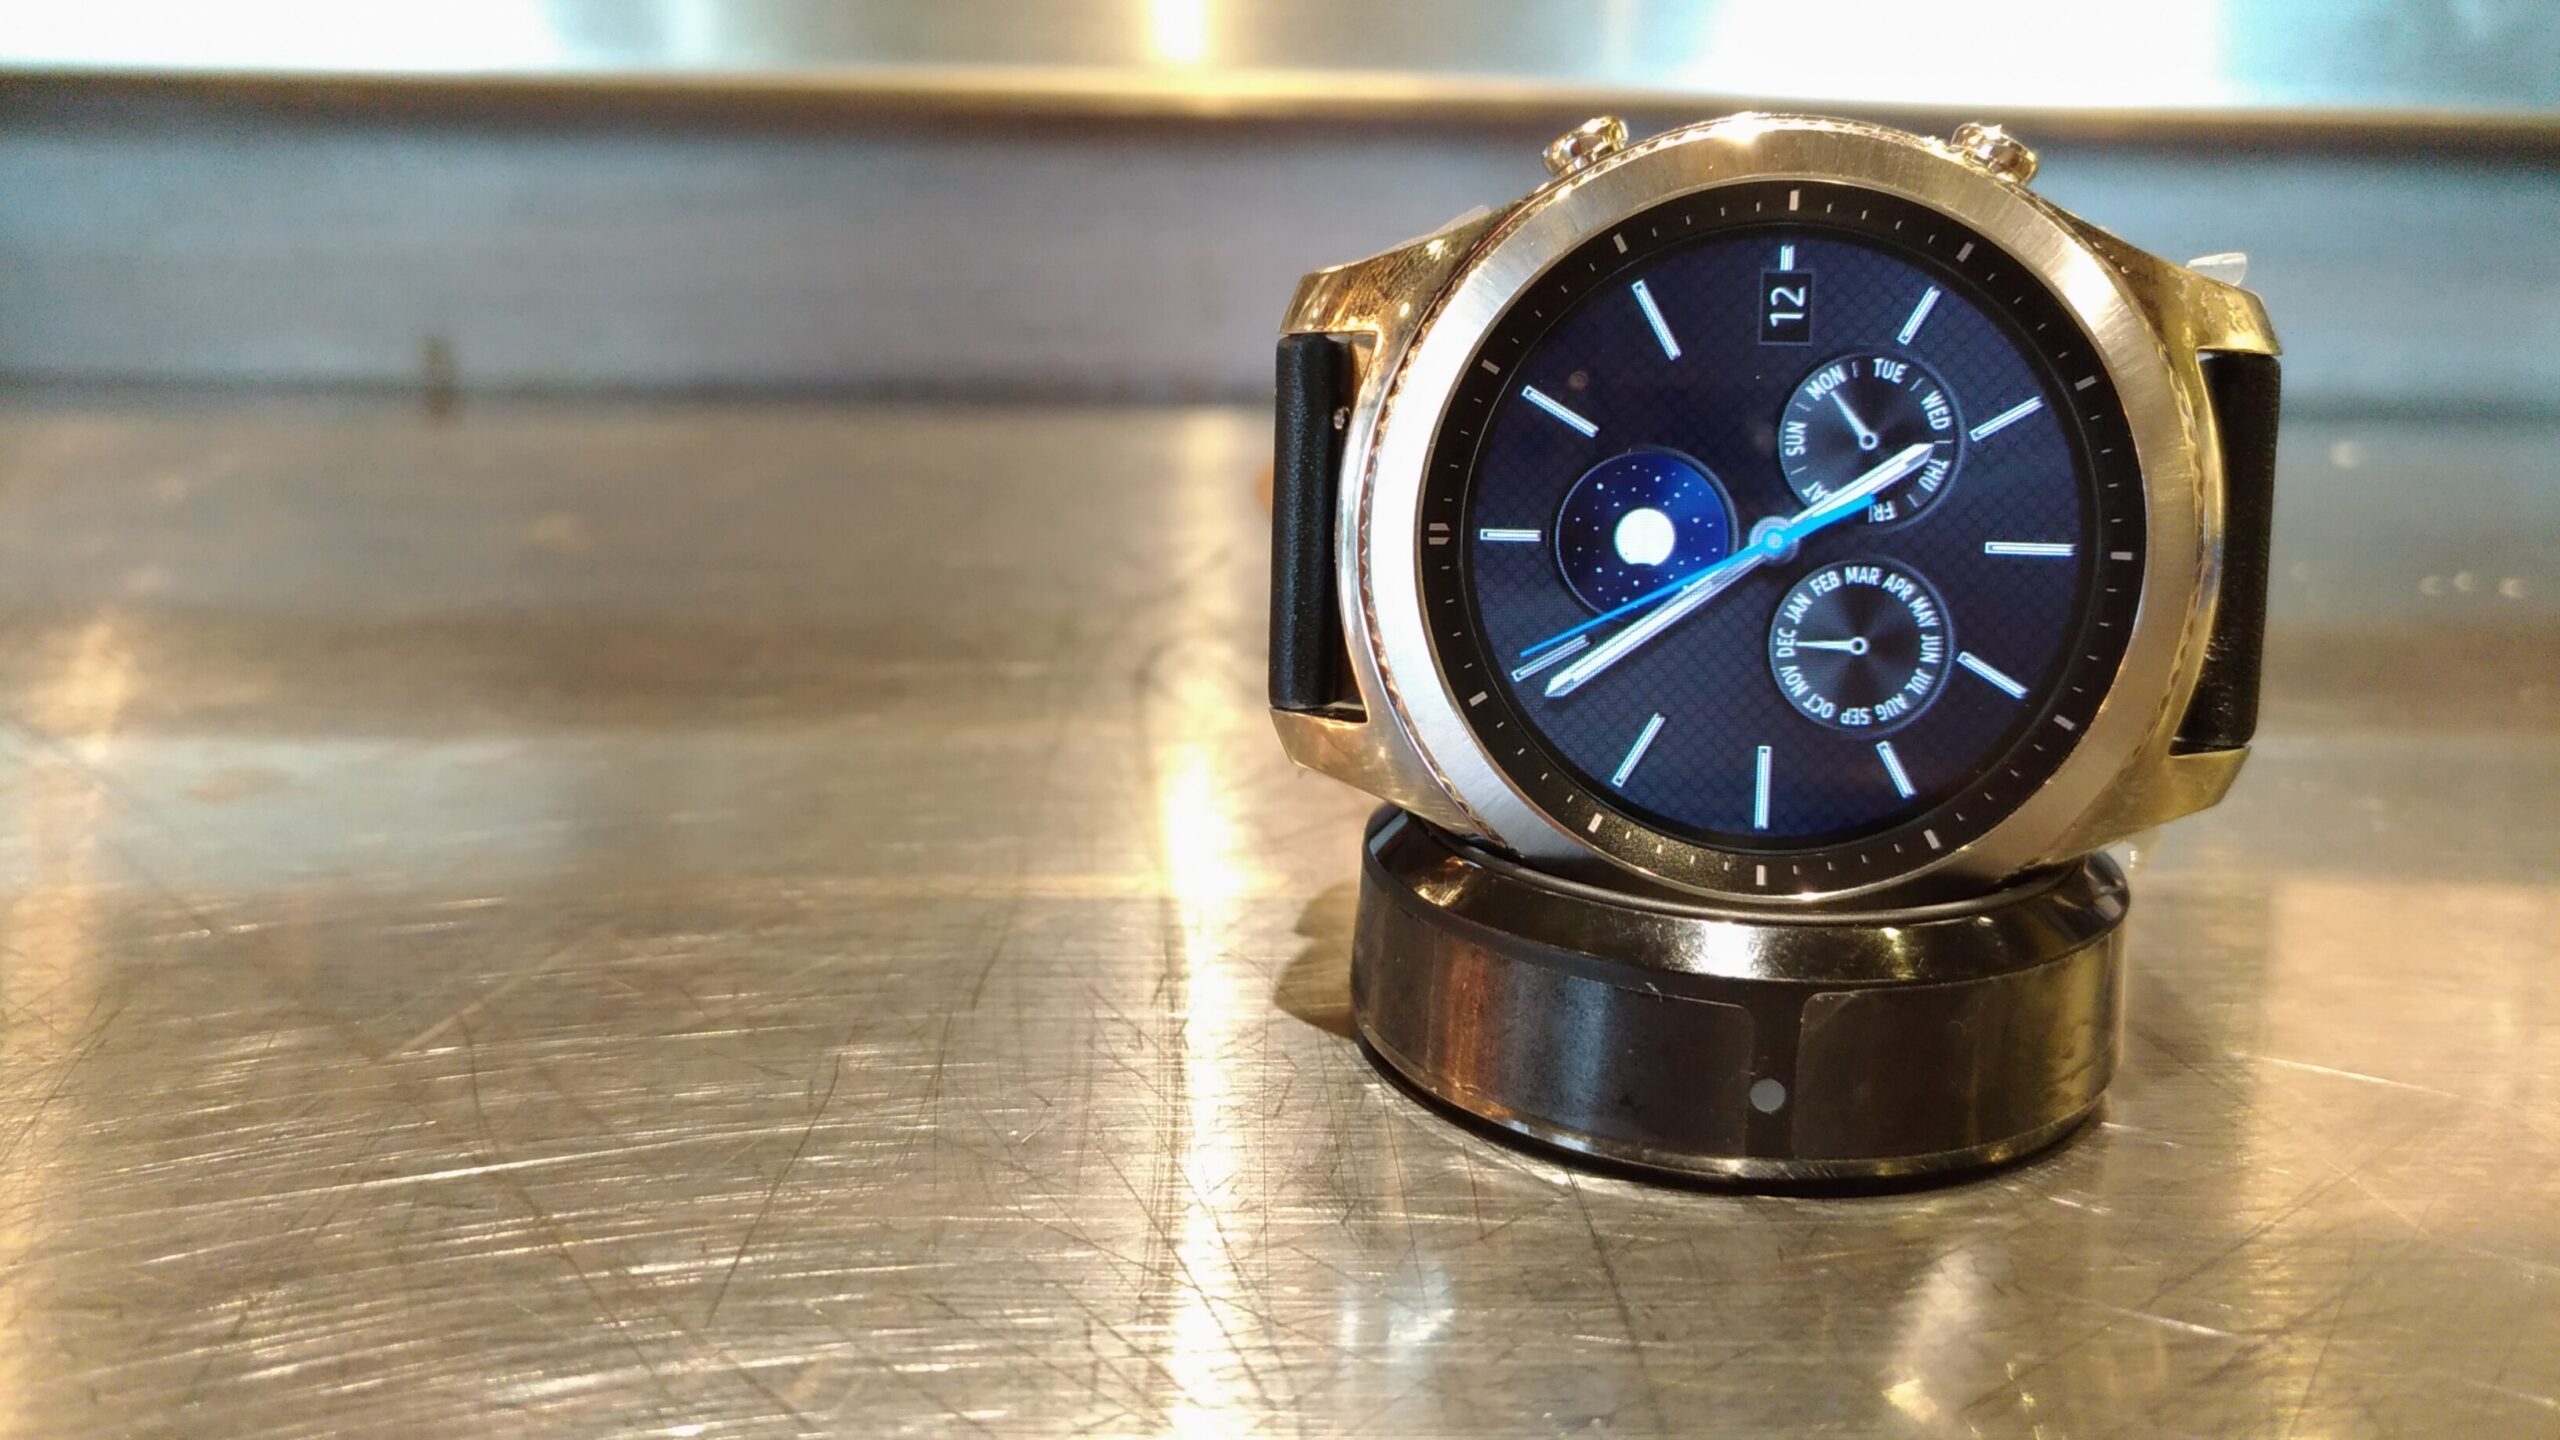 Samsung Gear S3 heading to the Philippines on January 14